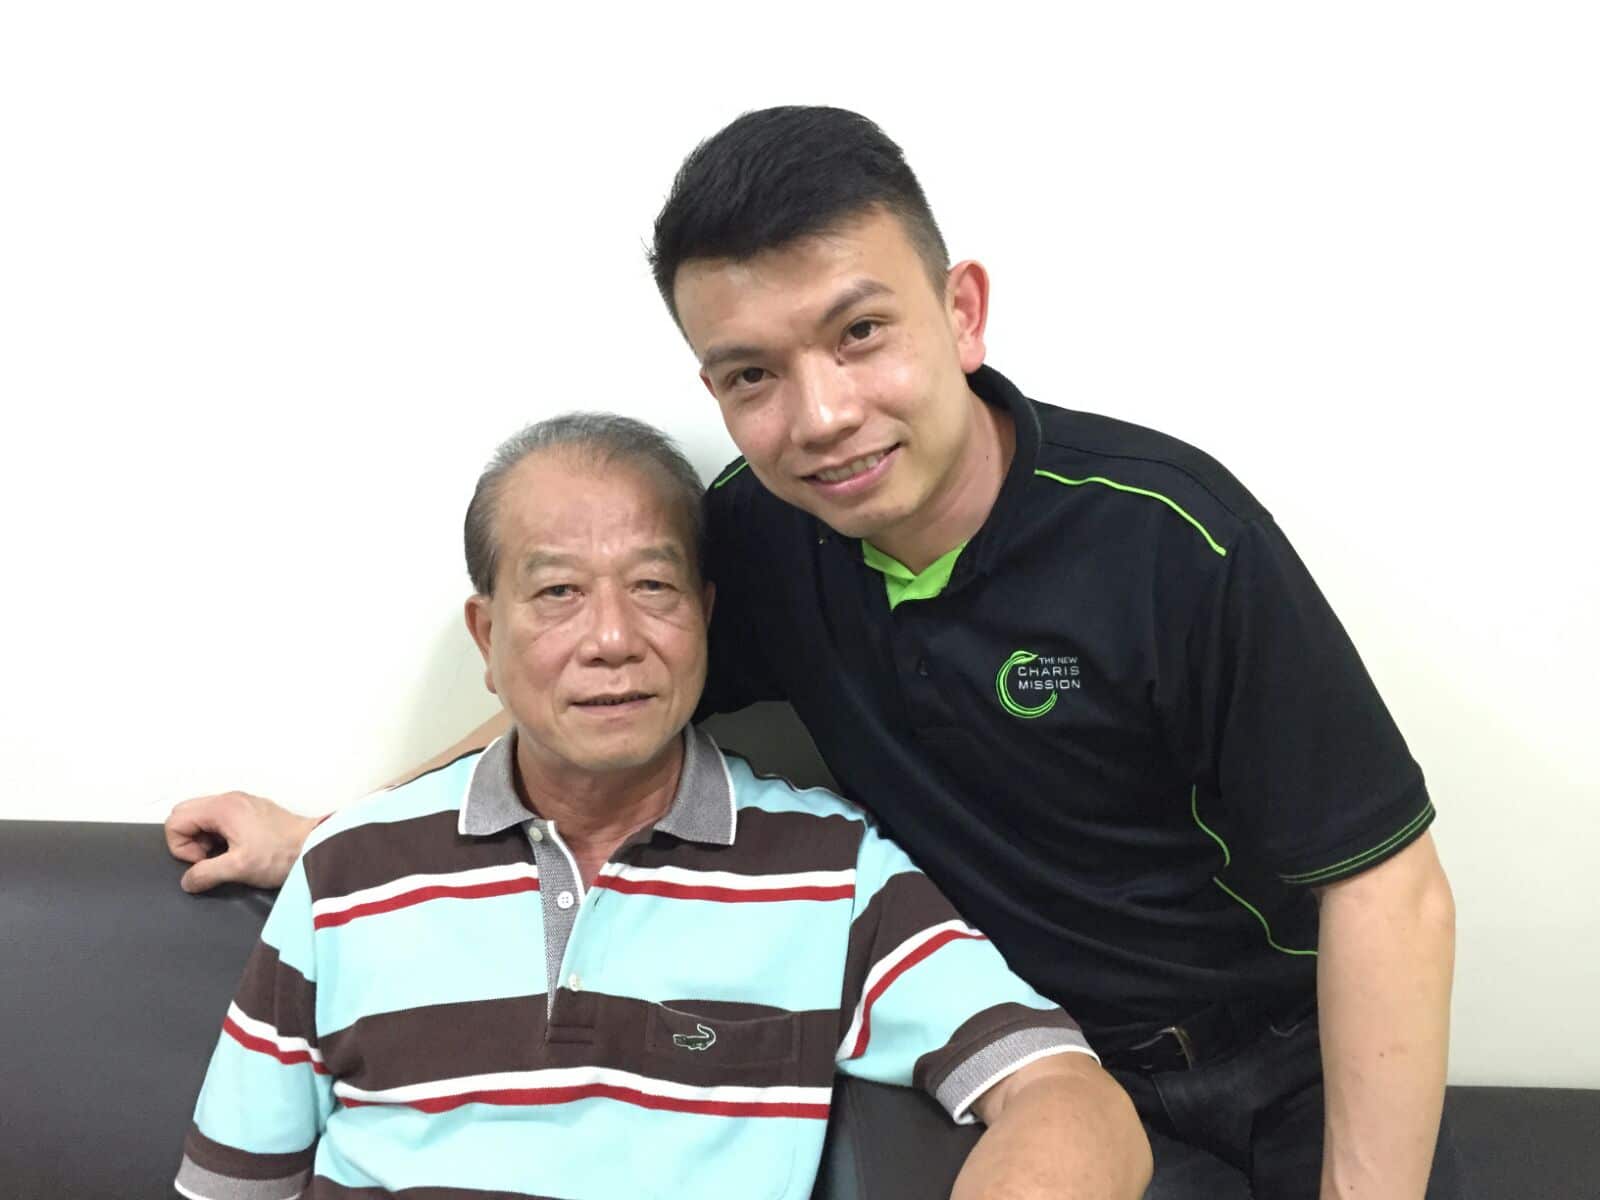 His dad once told him to jump from their HDB flat. What healed their relationship?